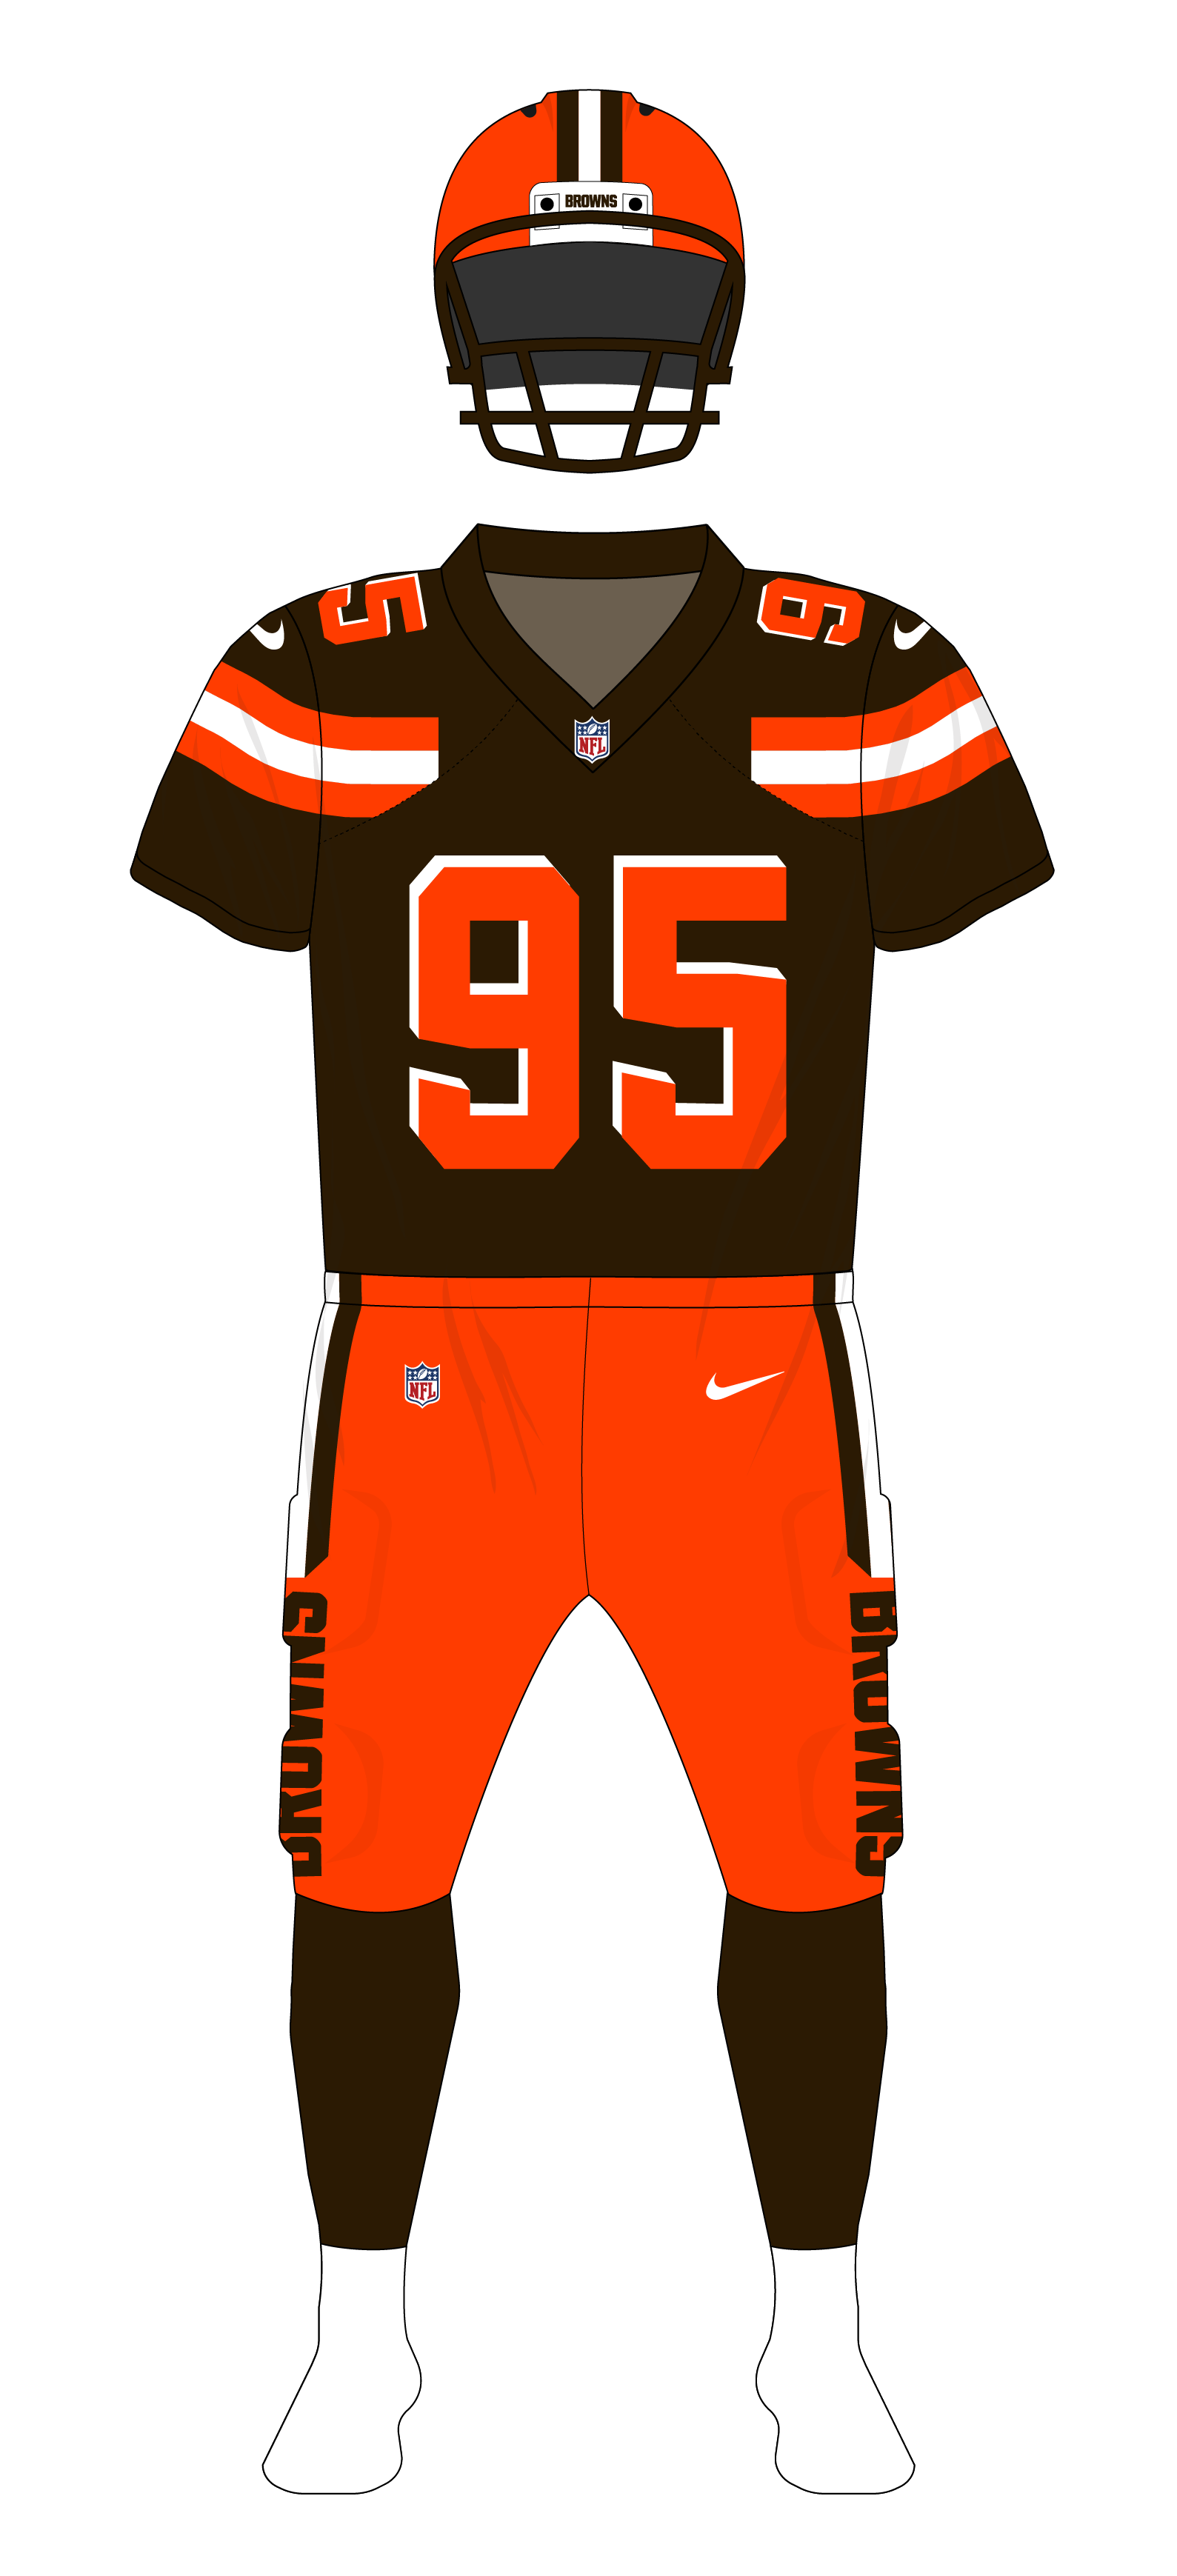 cleveland browns jersey 2015